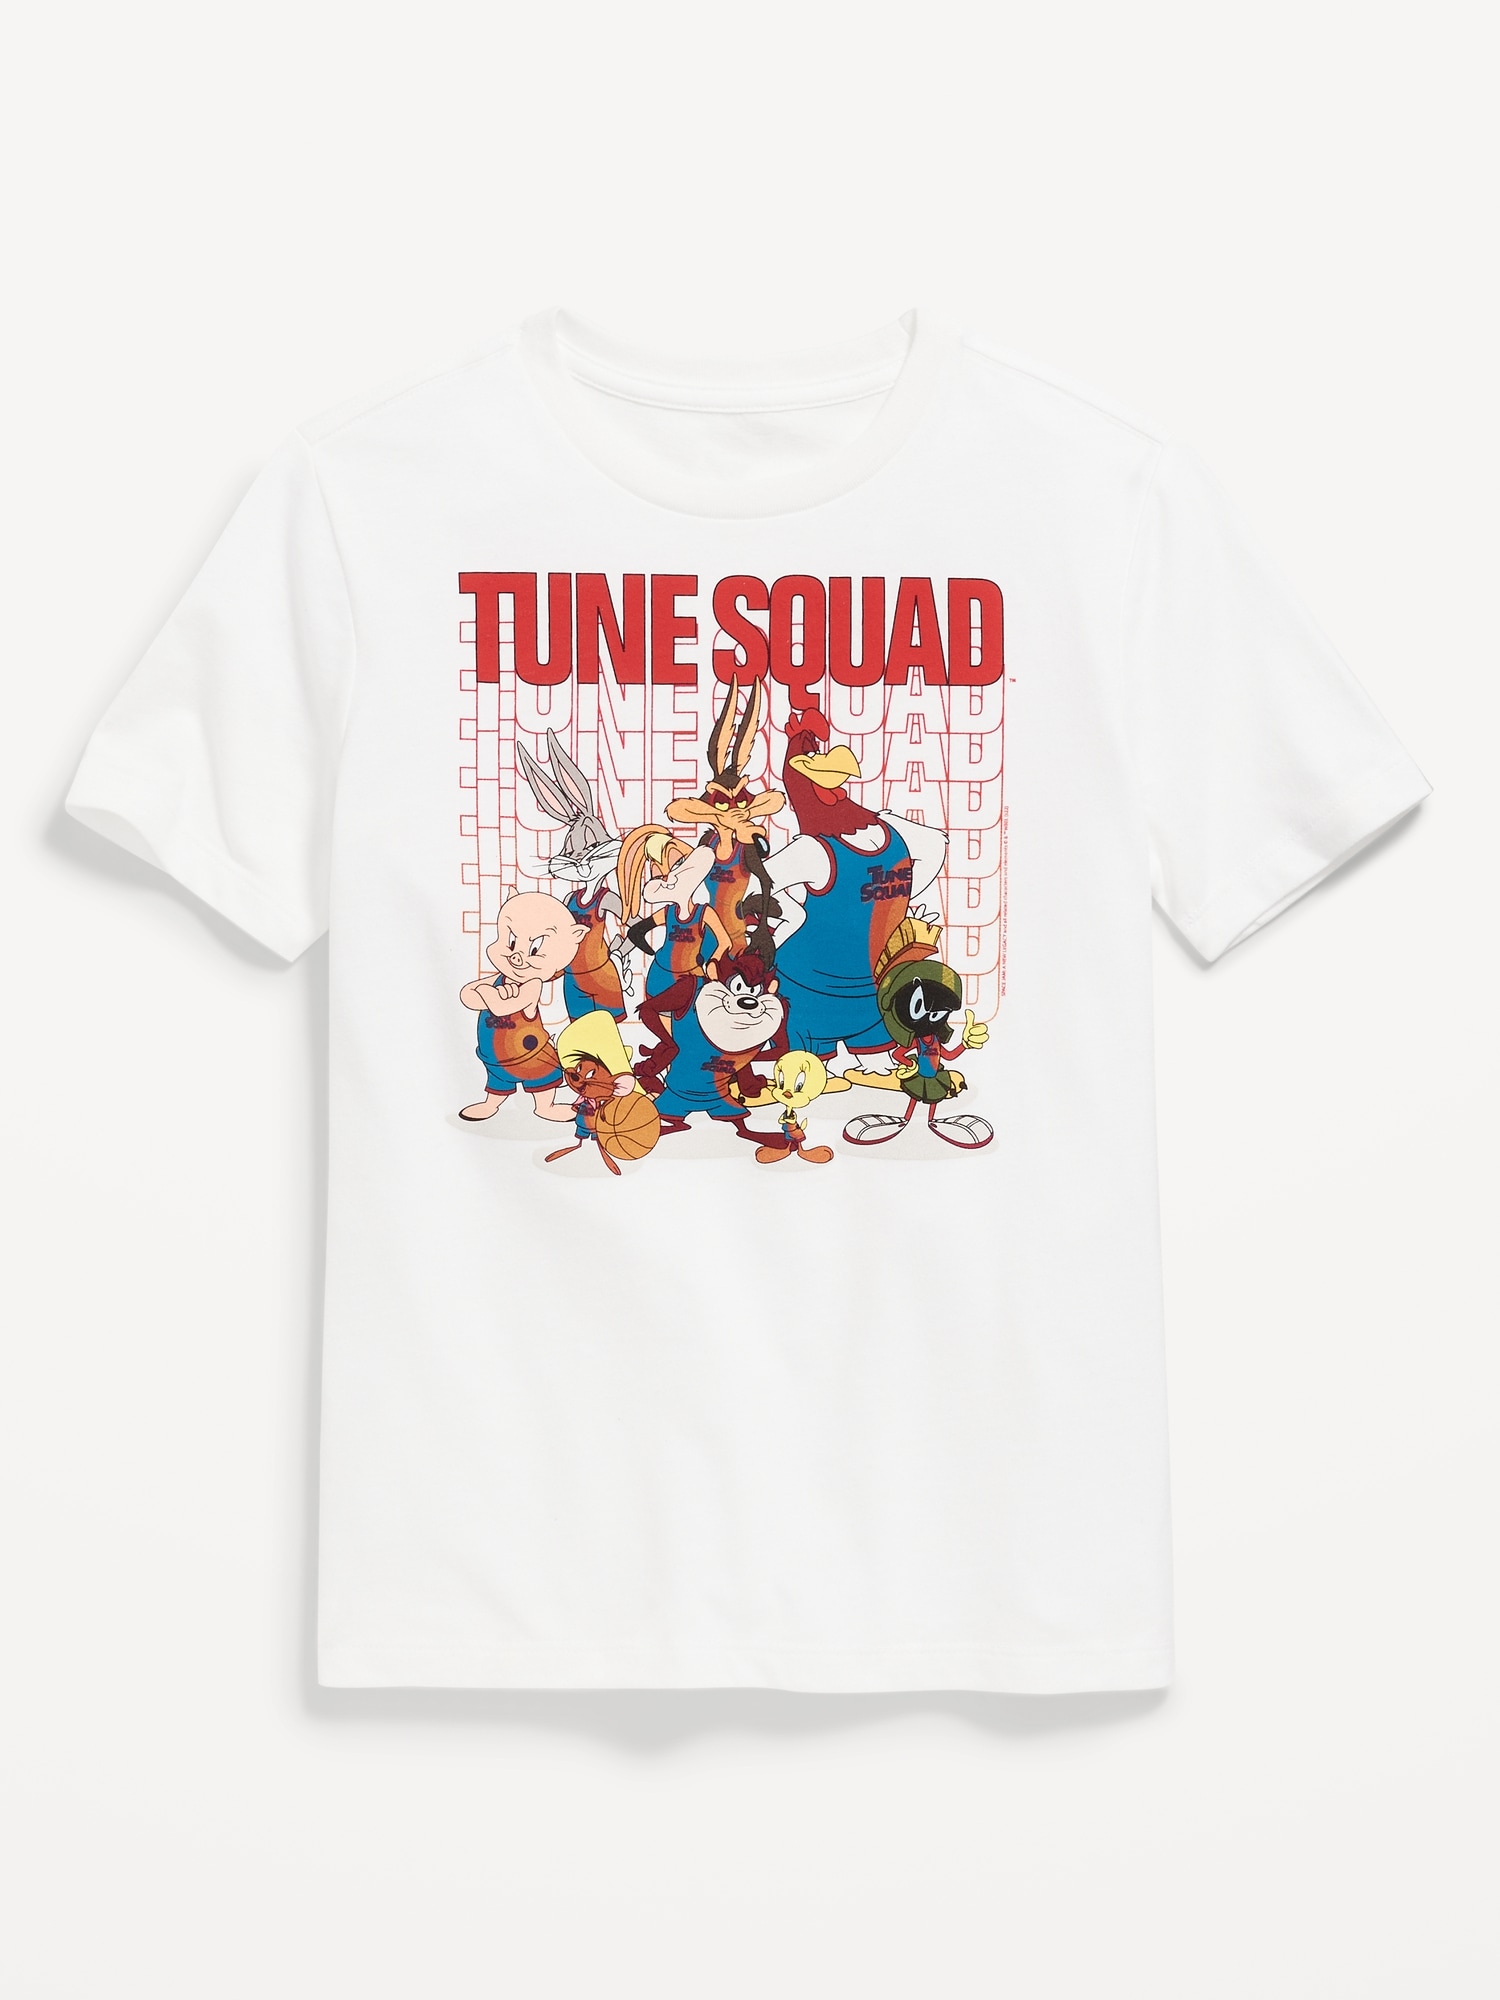 Space Jam Tune Squad Women’s Black and White T-shirt-L